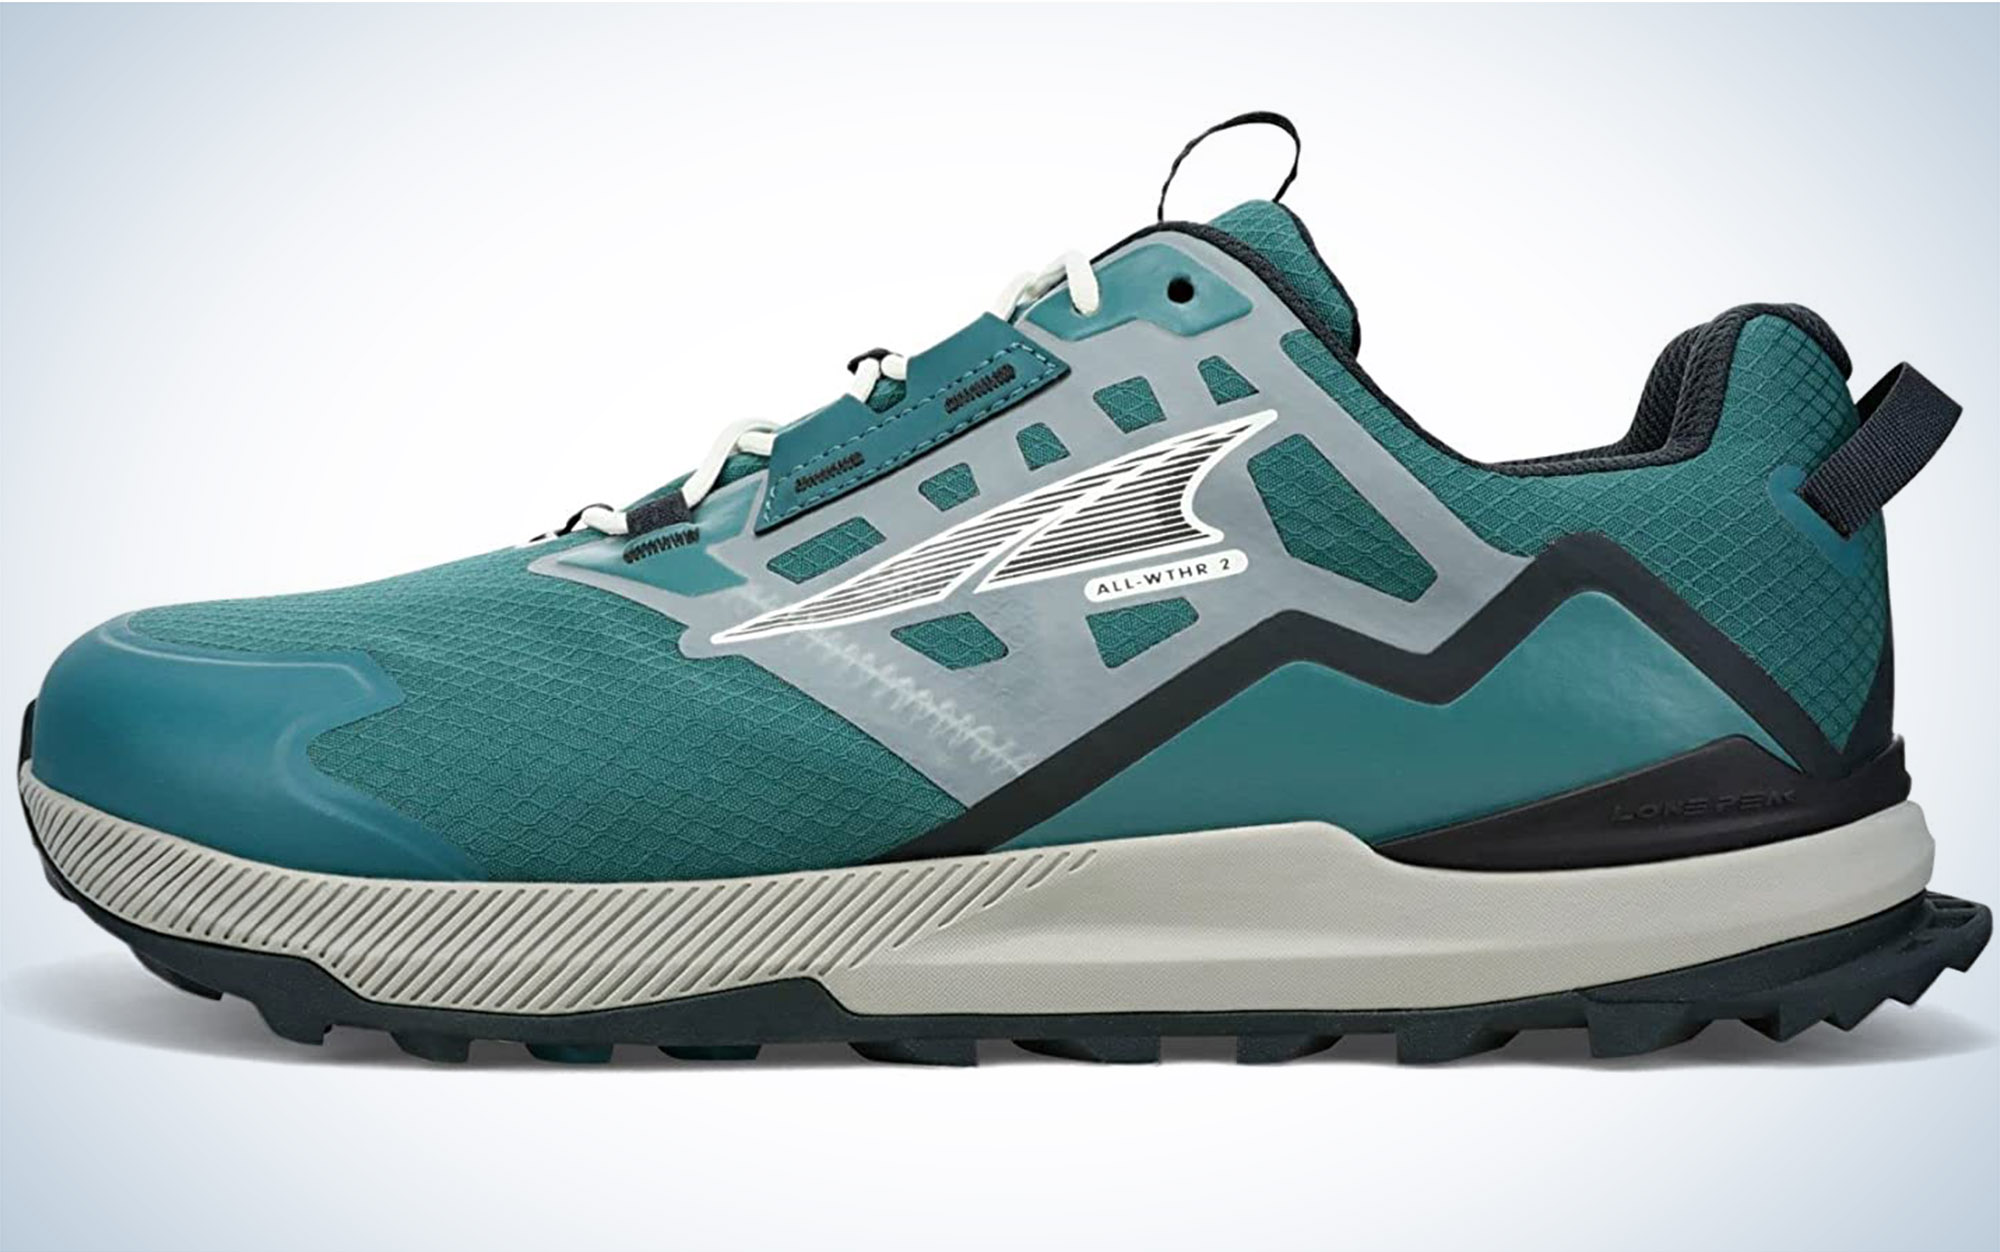 We tested the Altra Lone Peak All-Wthr Low.